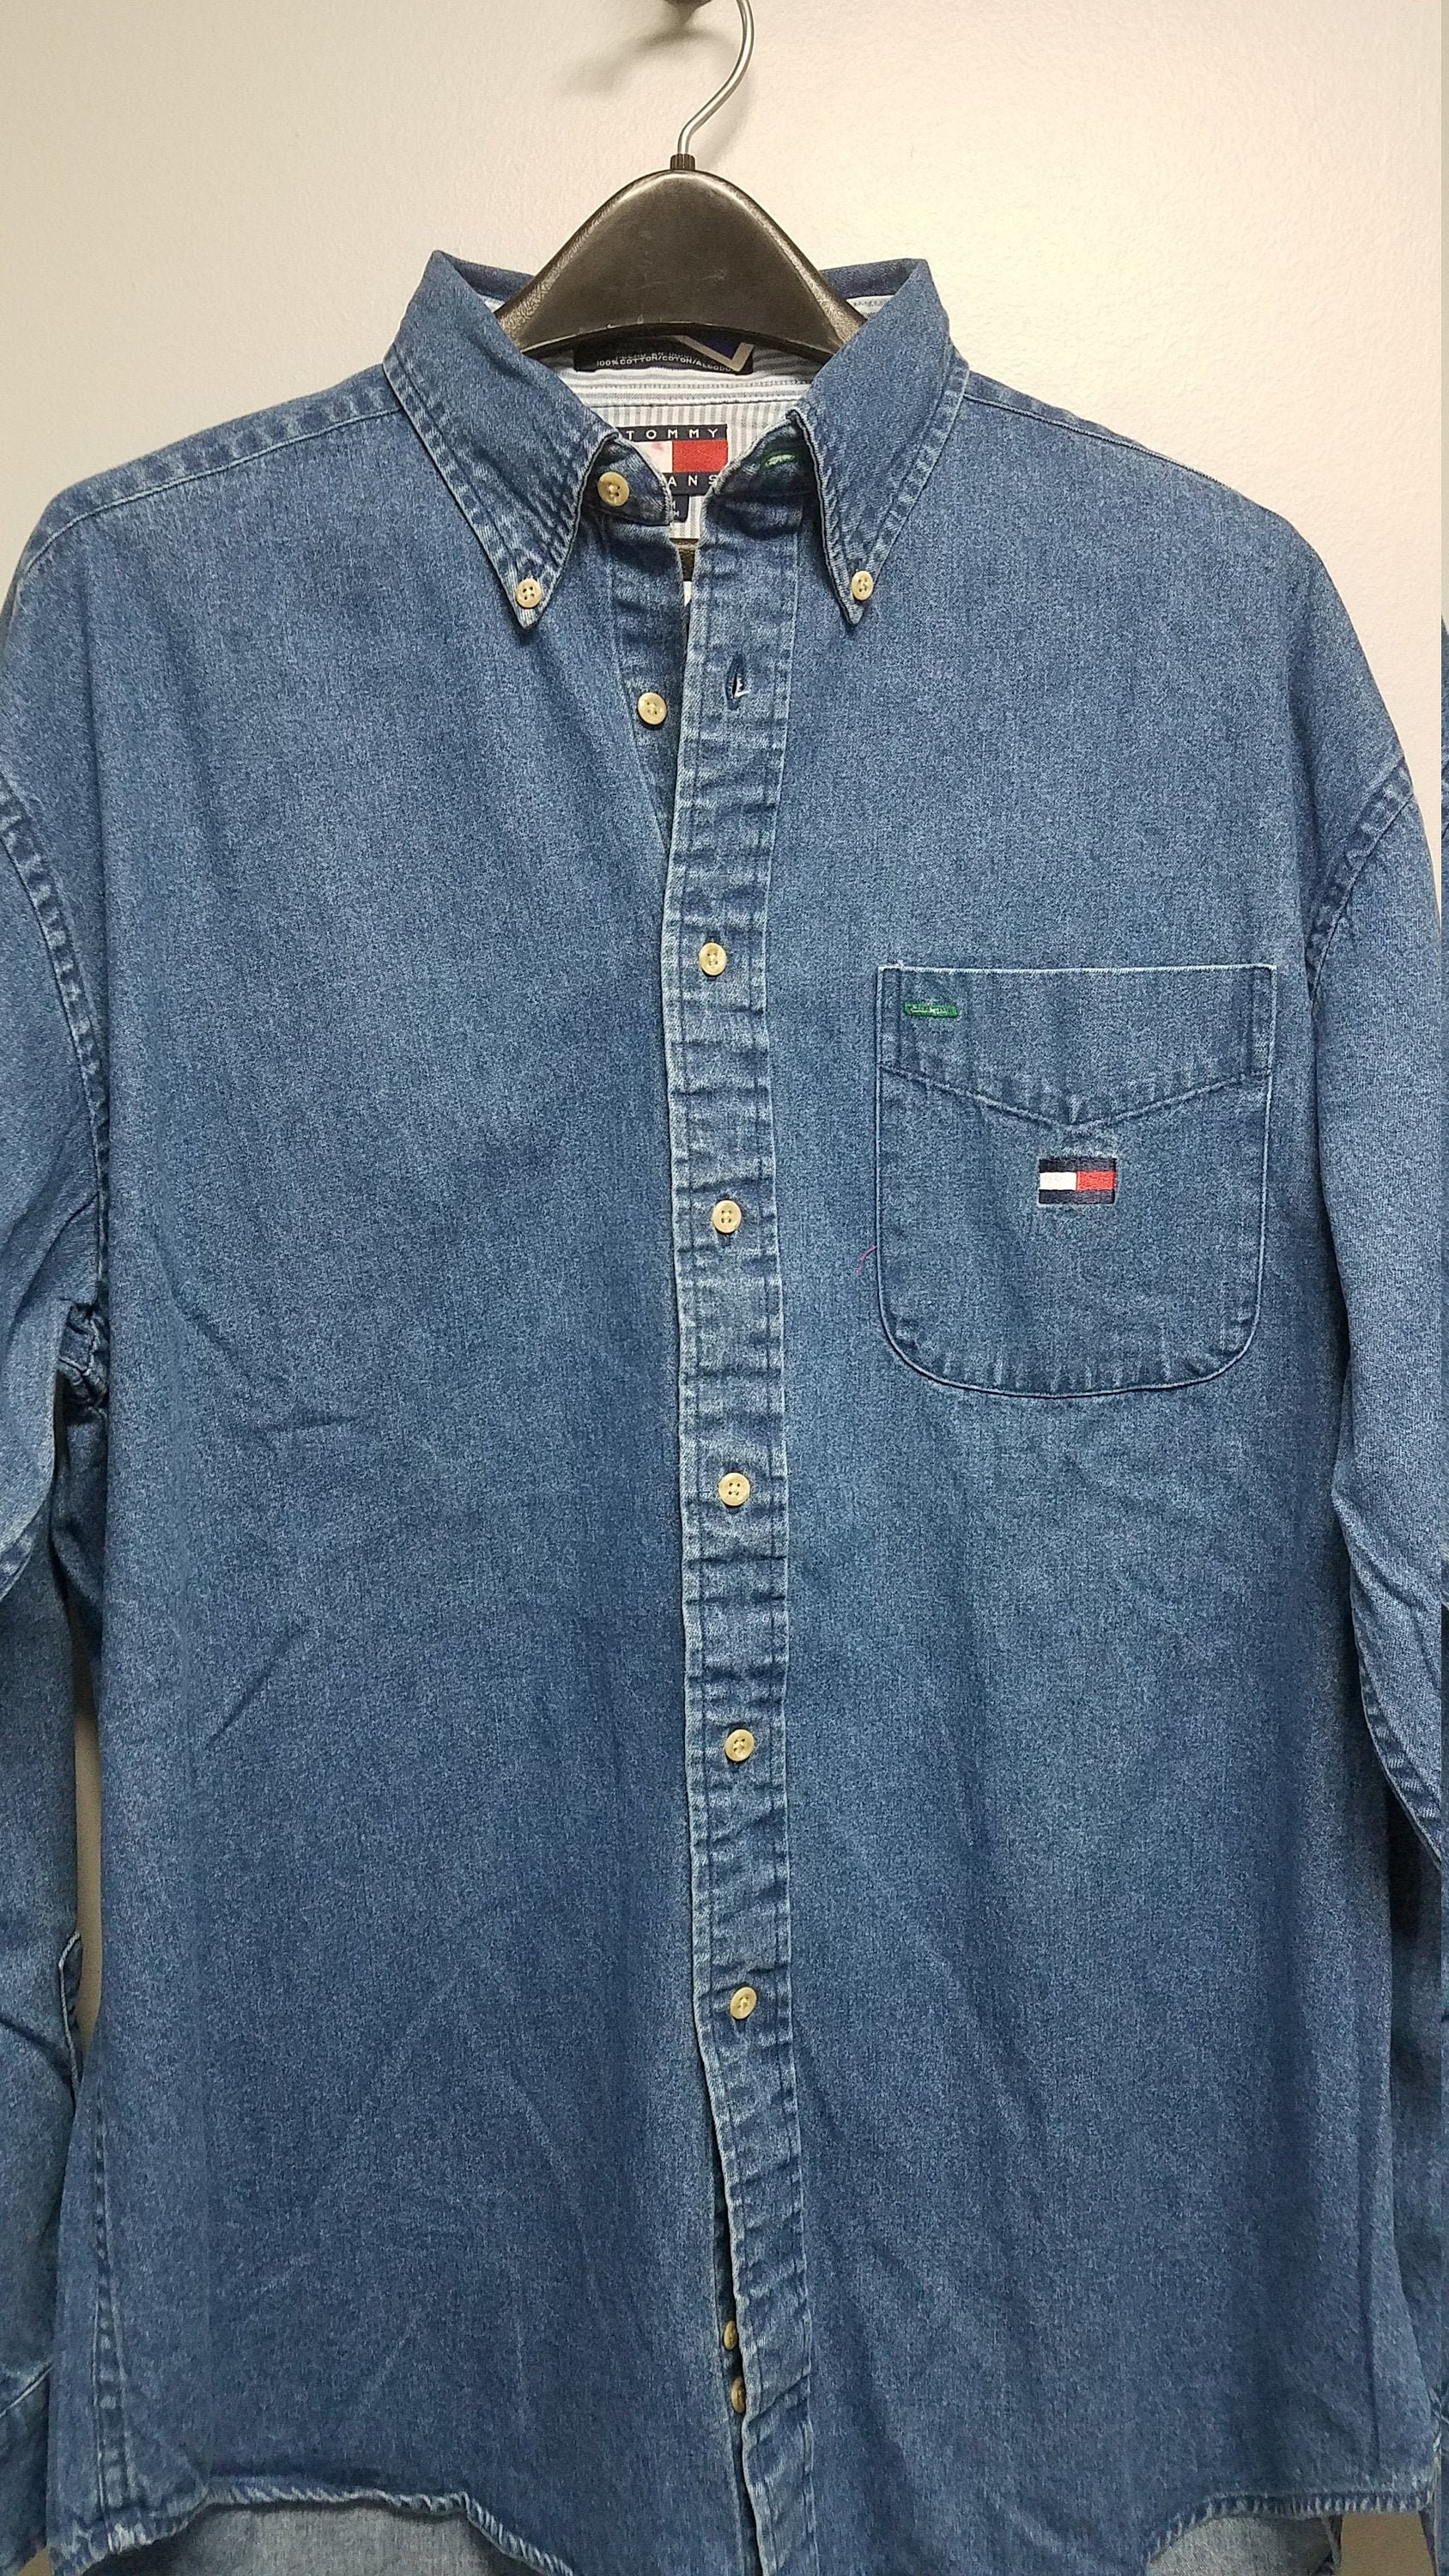 Vintage Classic Bluedenim Shirt 80's Early 90's Size Medium by TOMMY  HILFIGER Never Worn, Still With Tags On 